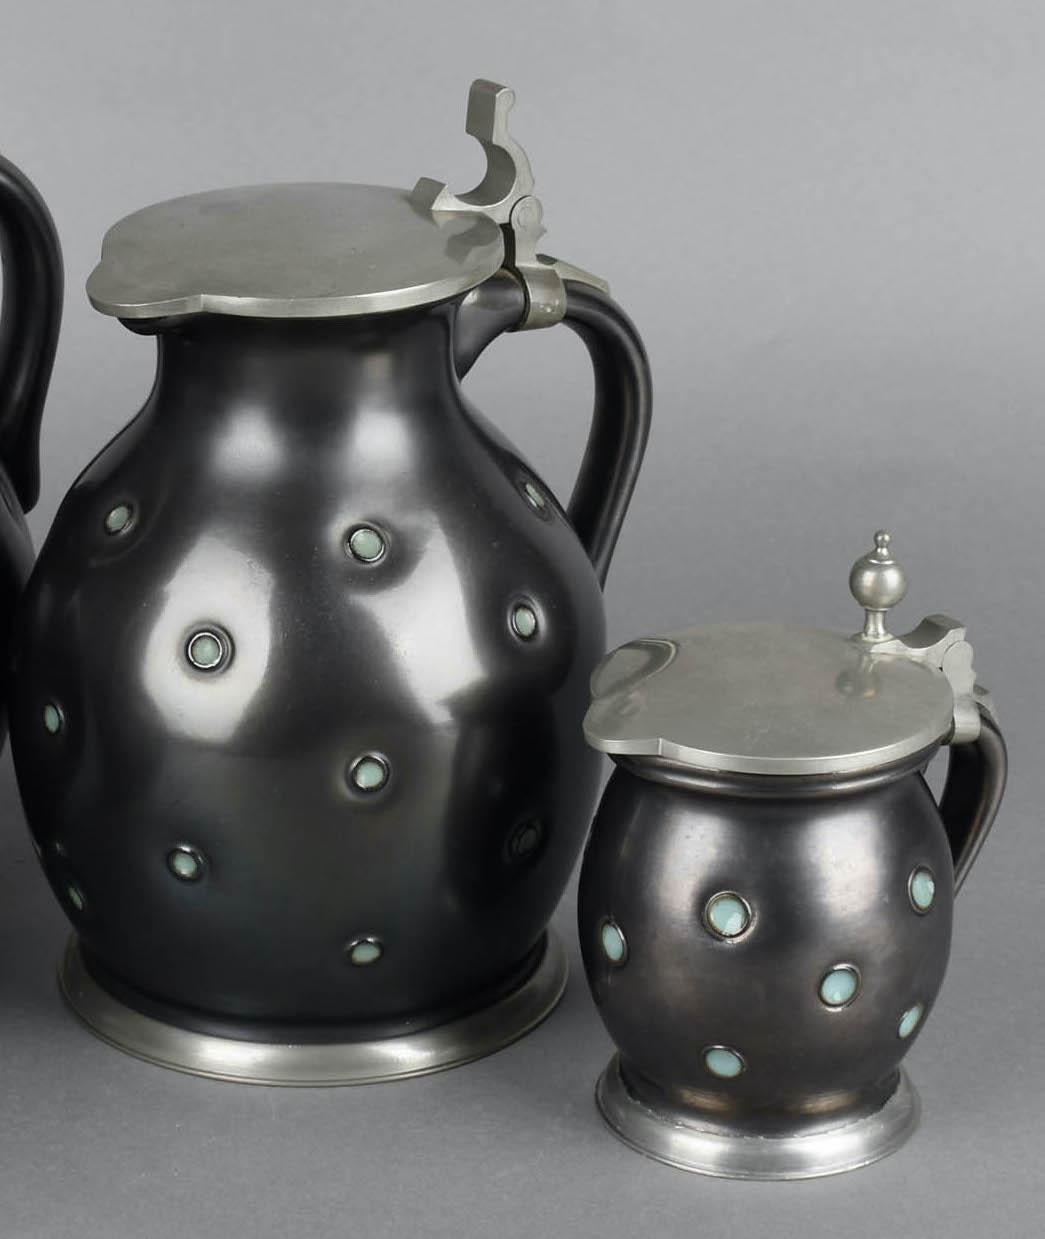 Black coffee set by Eugen Wiedamann is an original decorative group of objects realized between the 1950s and the 1960s. 

Made in Germany. Realized by Eugen Wiedamann, Regensburg.

The work is composed by different materials: metal, enamel, and